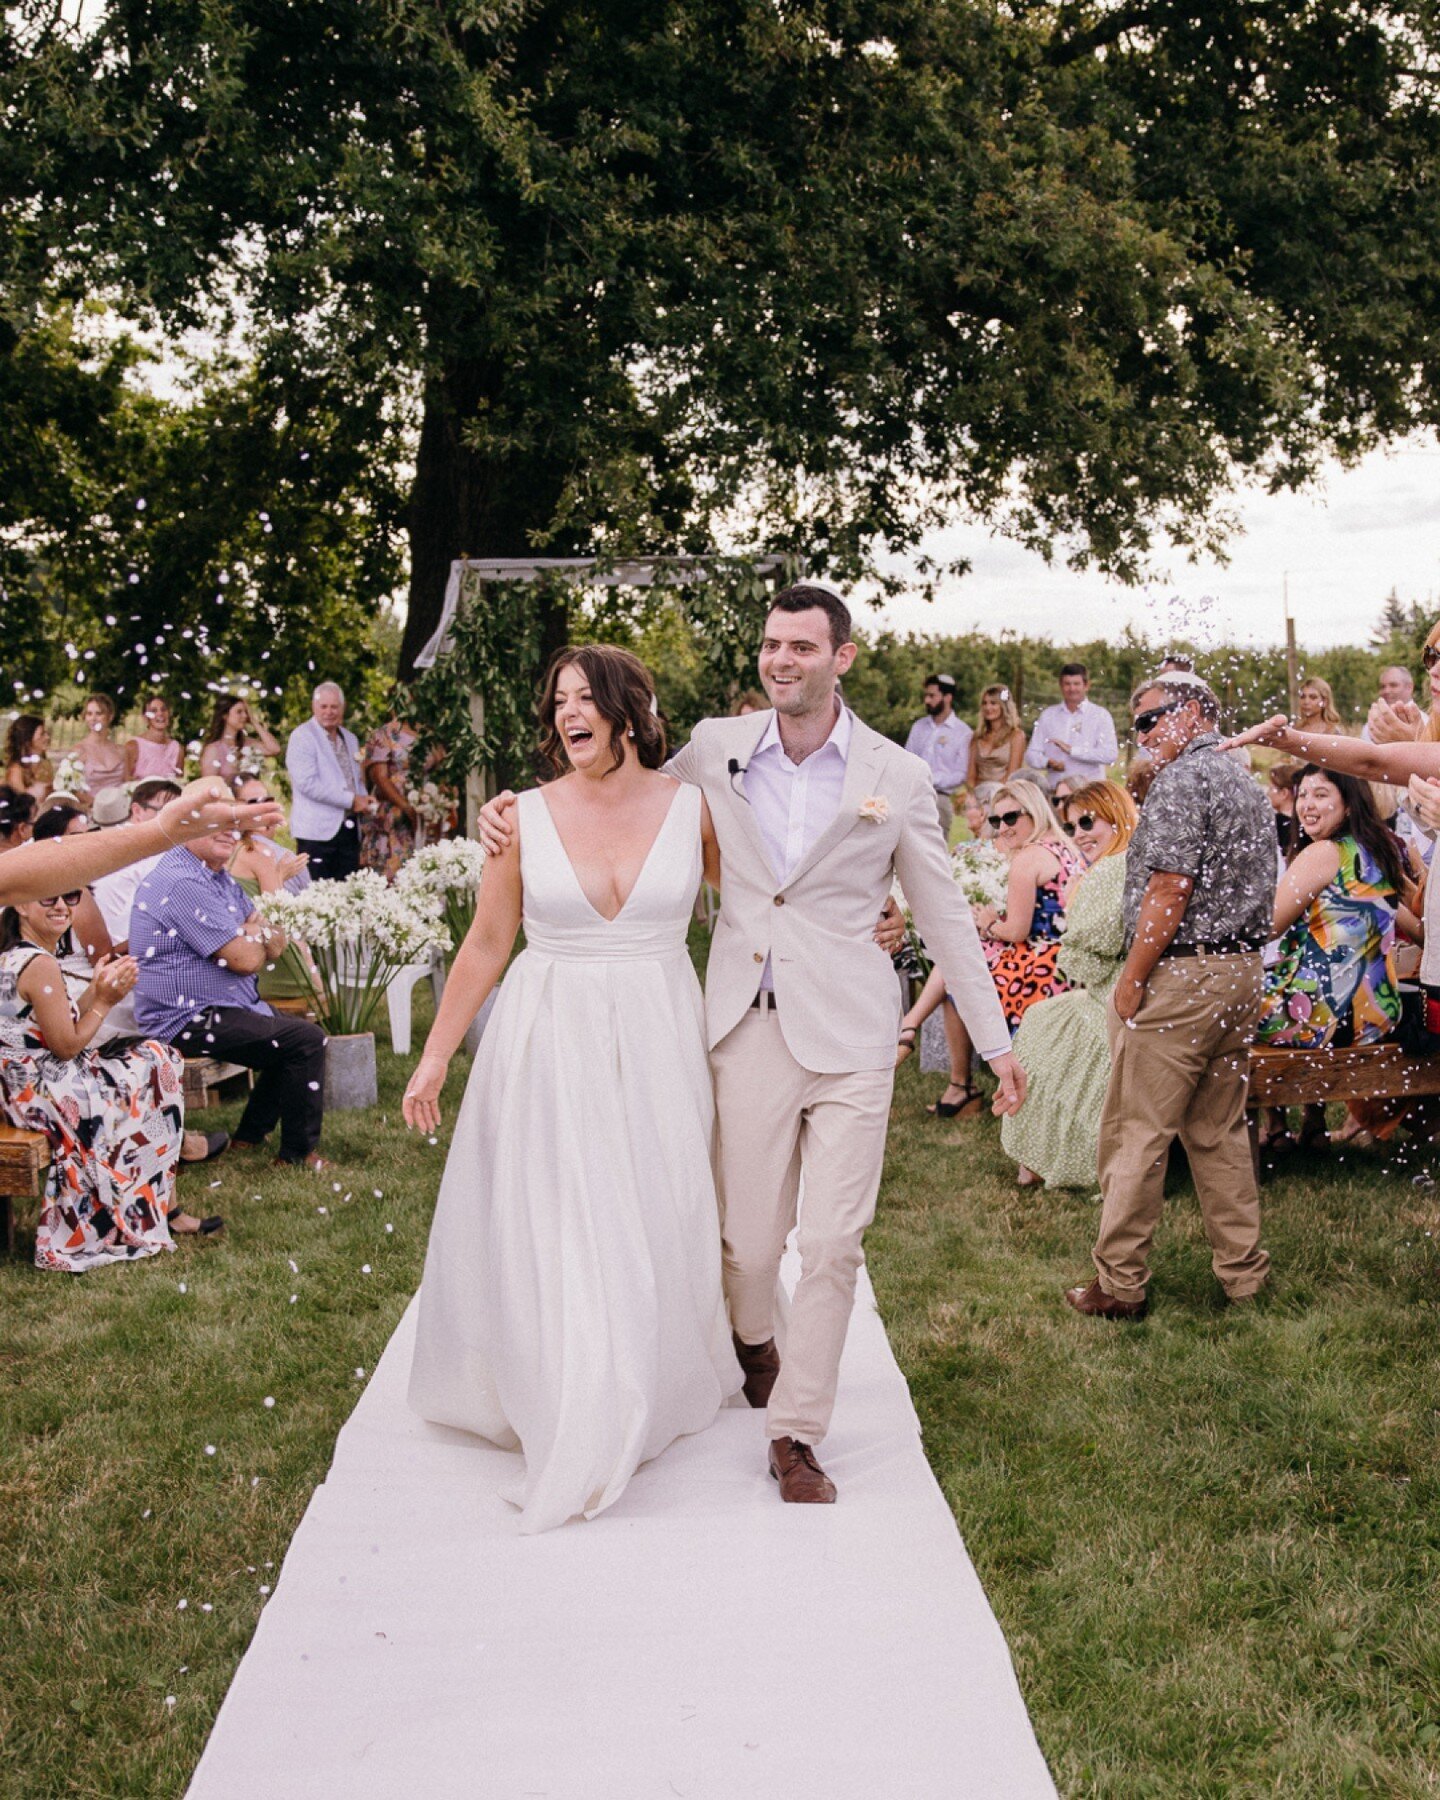 Married under the chuppah in the most beautiful Jewish ceremony in Lily's family orchard, this wedding was one of those 'all hands on deck' kind of events. You know with weddings how you pull in all kinds of favours from friends and family (like they